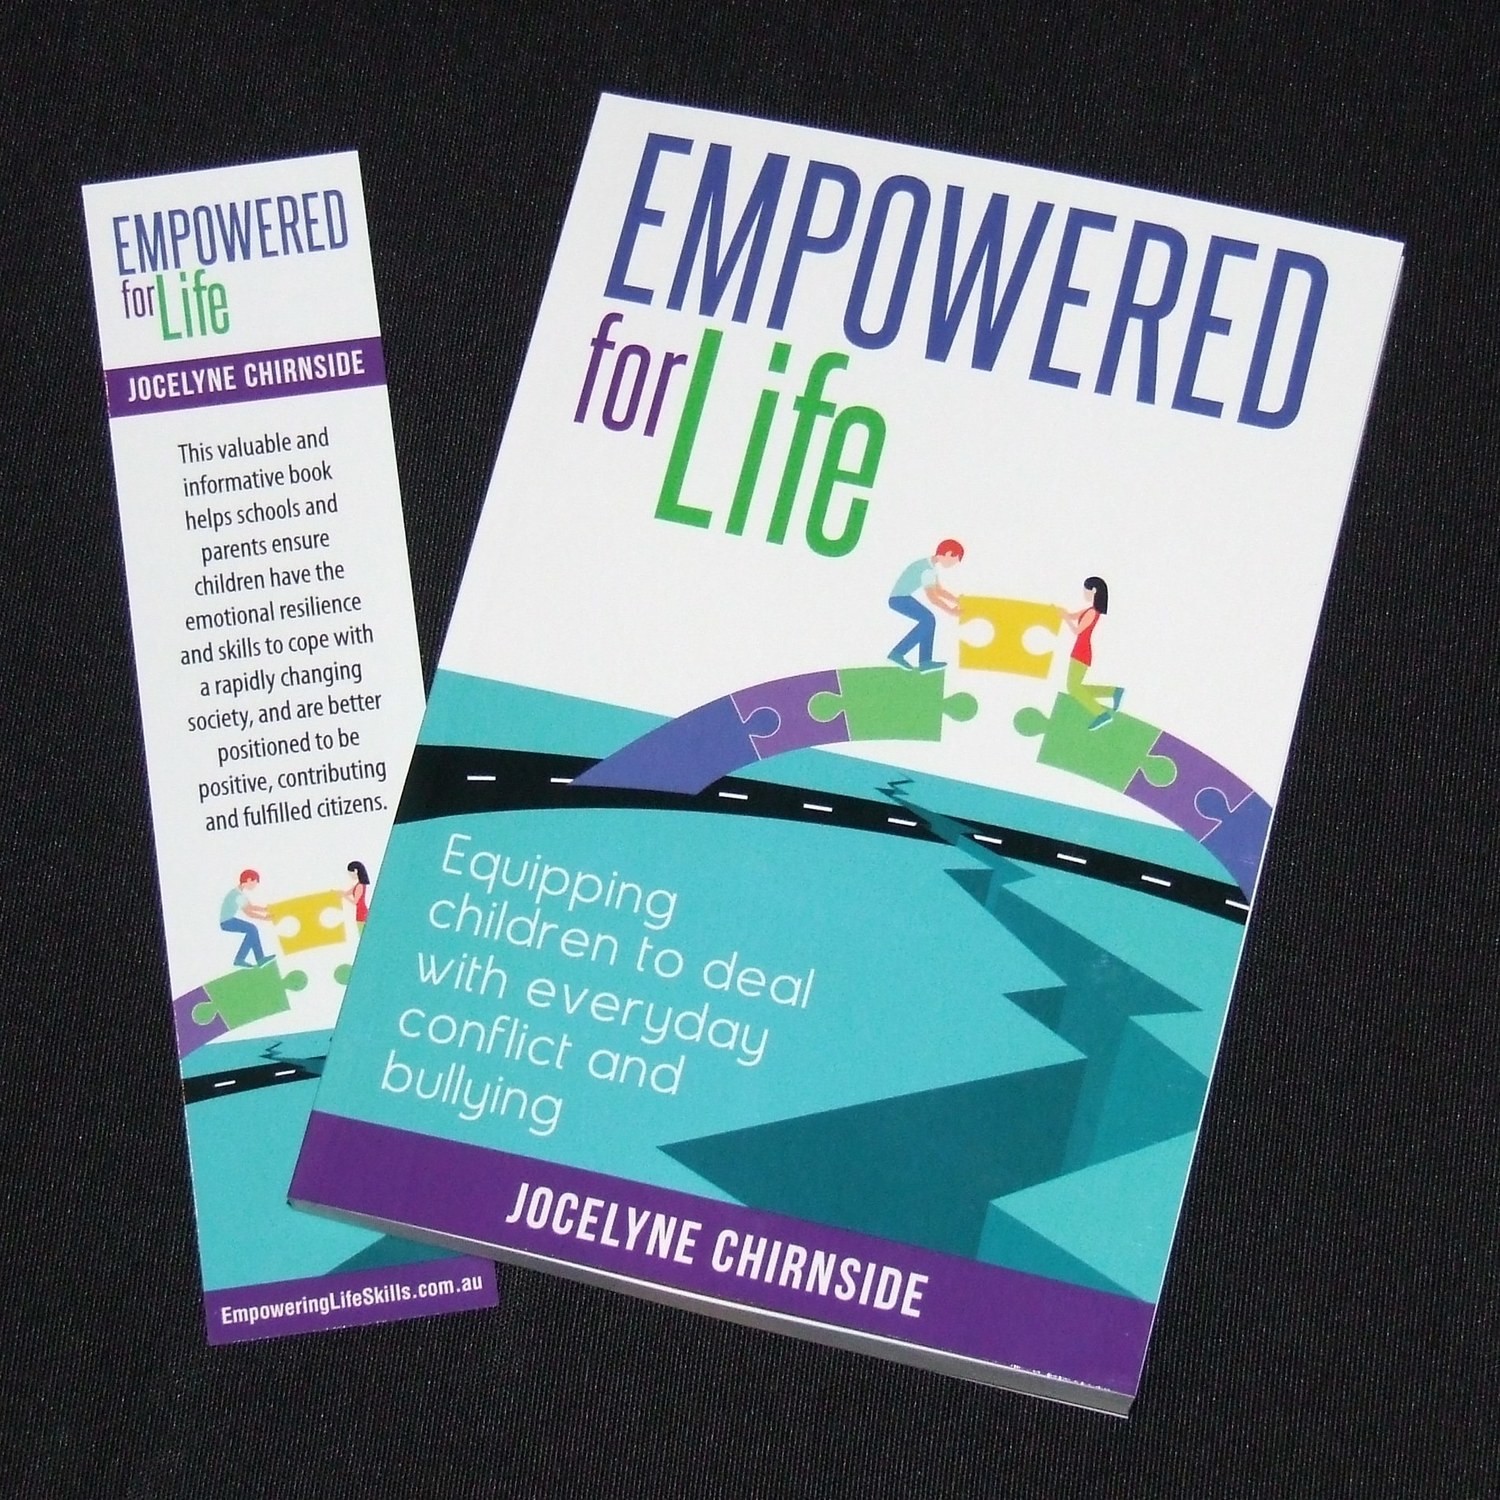 EMPOWERED for Life